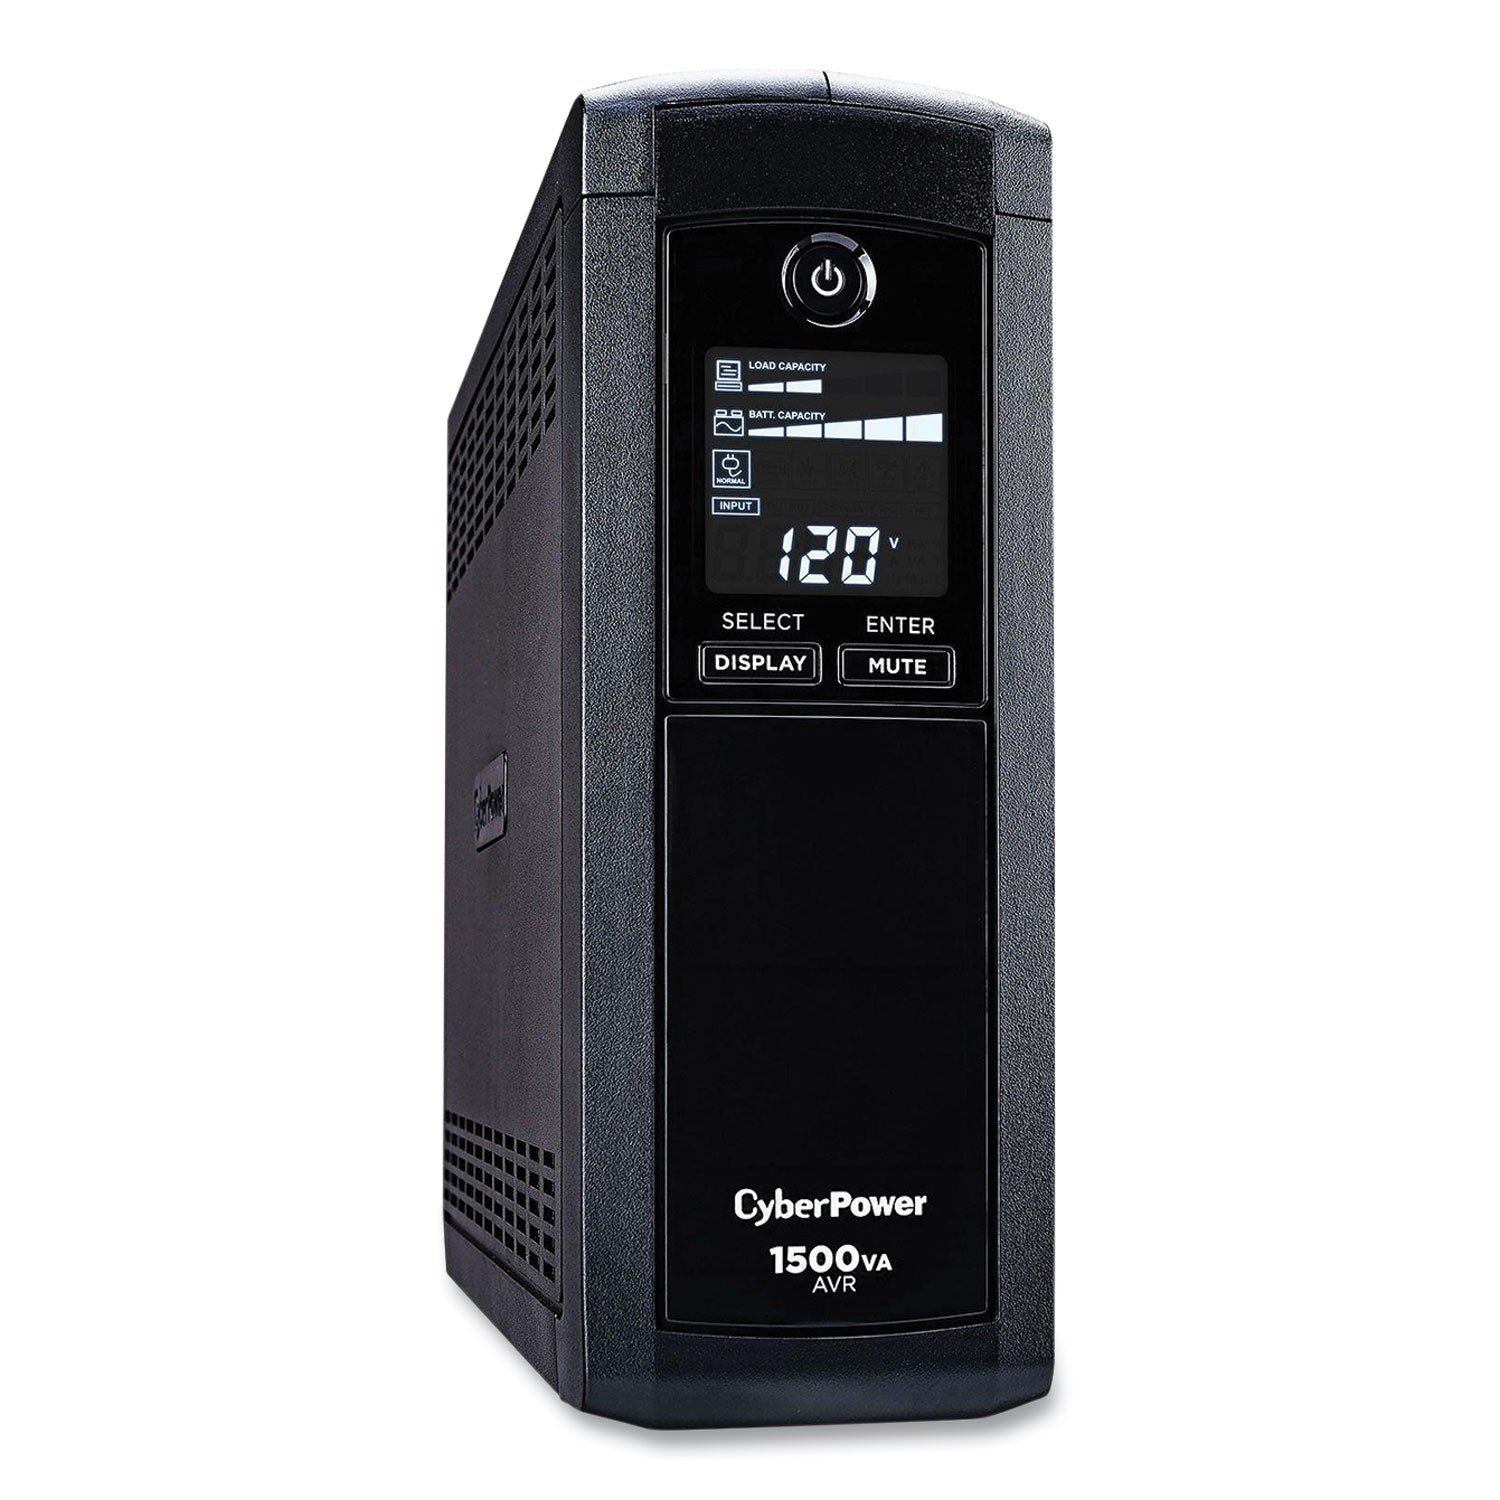 pfc-sinewave-cp1500pfclcd-ups-battery-backup-12-outlets-1500-va-1030-j_cypcp1500pfclcd - 3